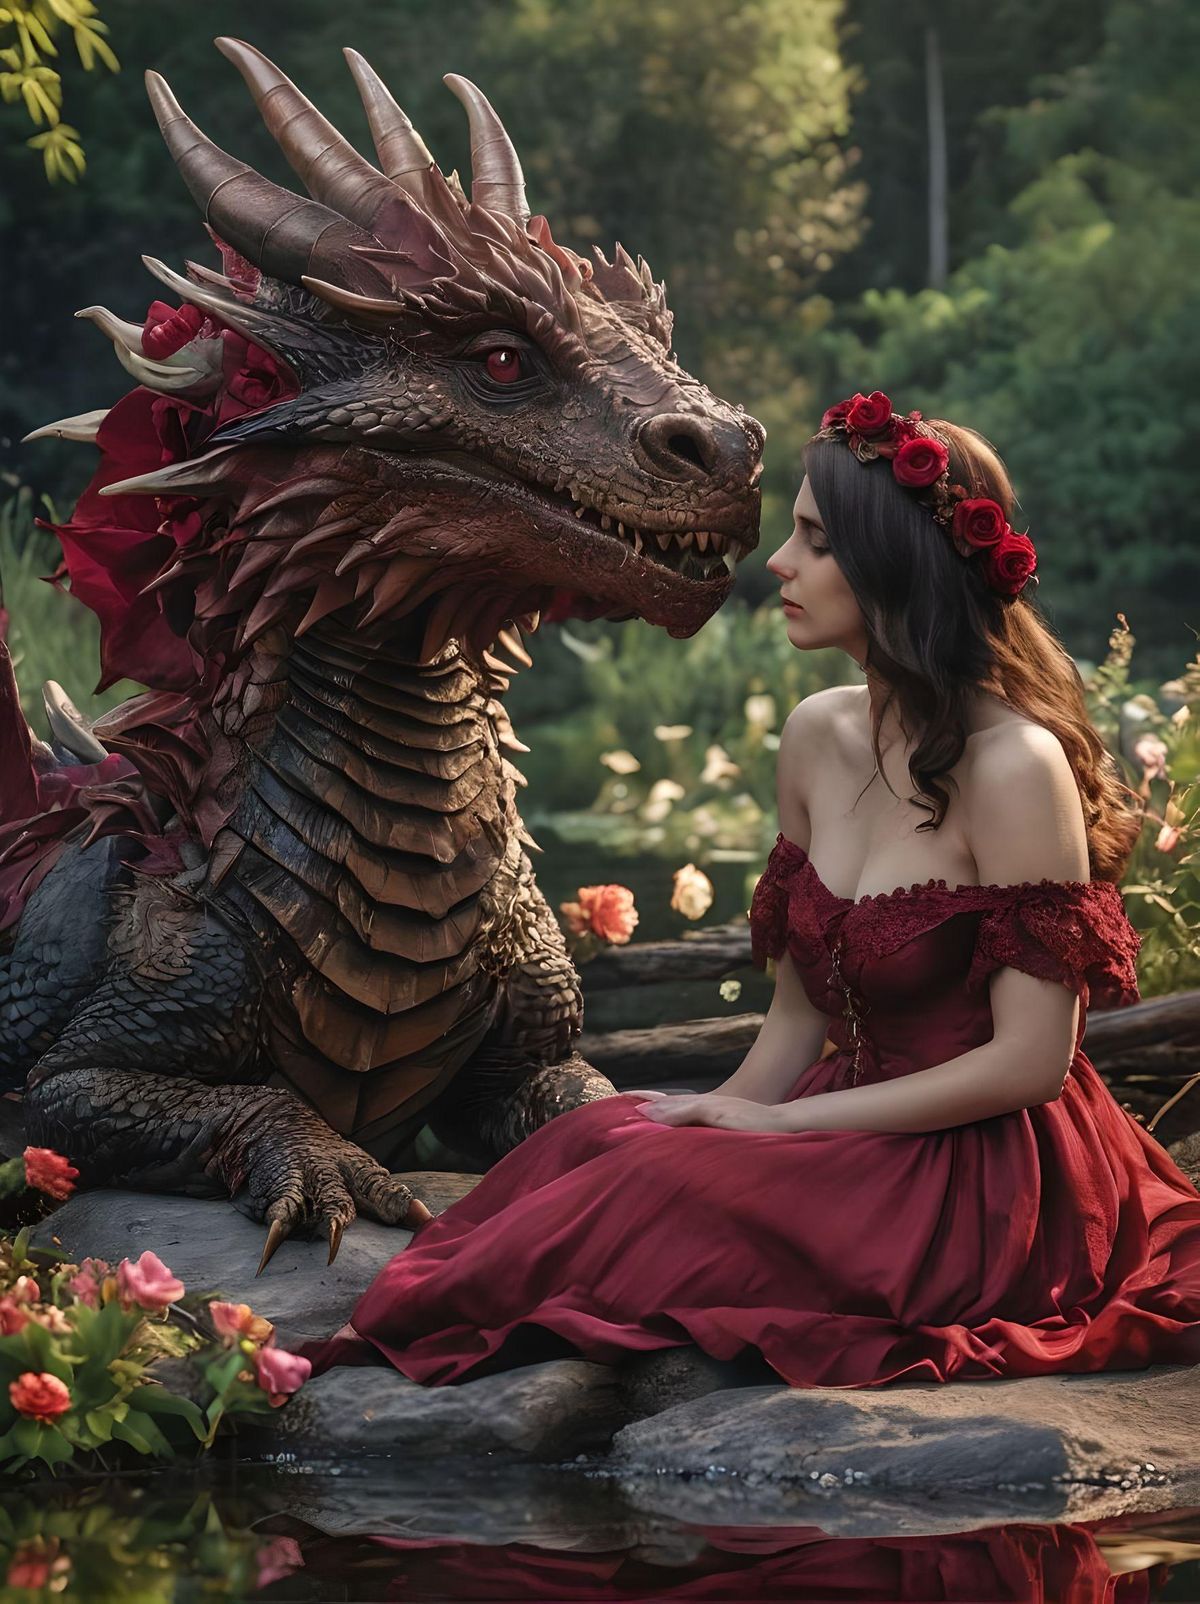 the adult princess sits by the pond bank near her huge brown pet dragon. They gaze lovingly in each other’s eyes. they are surrounded with flowers and birds. The princess is wearing an off shoulder lace burgundy dress, her dark brown lushious hair falls in her lap and she wears a dark red rose flower crown. 8k